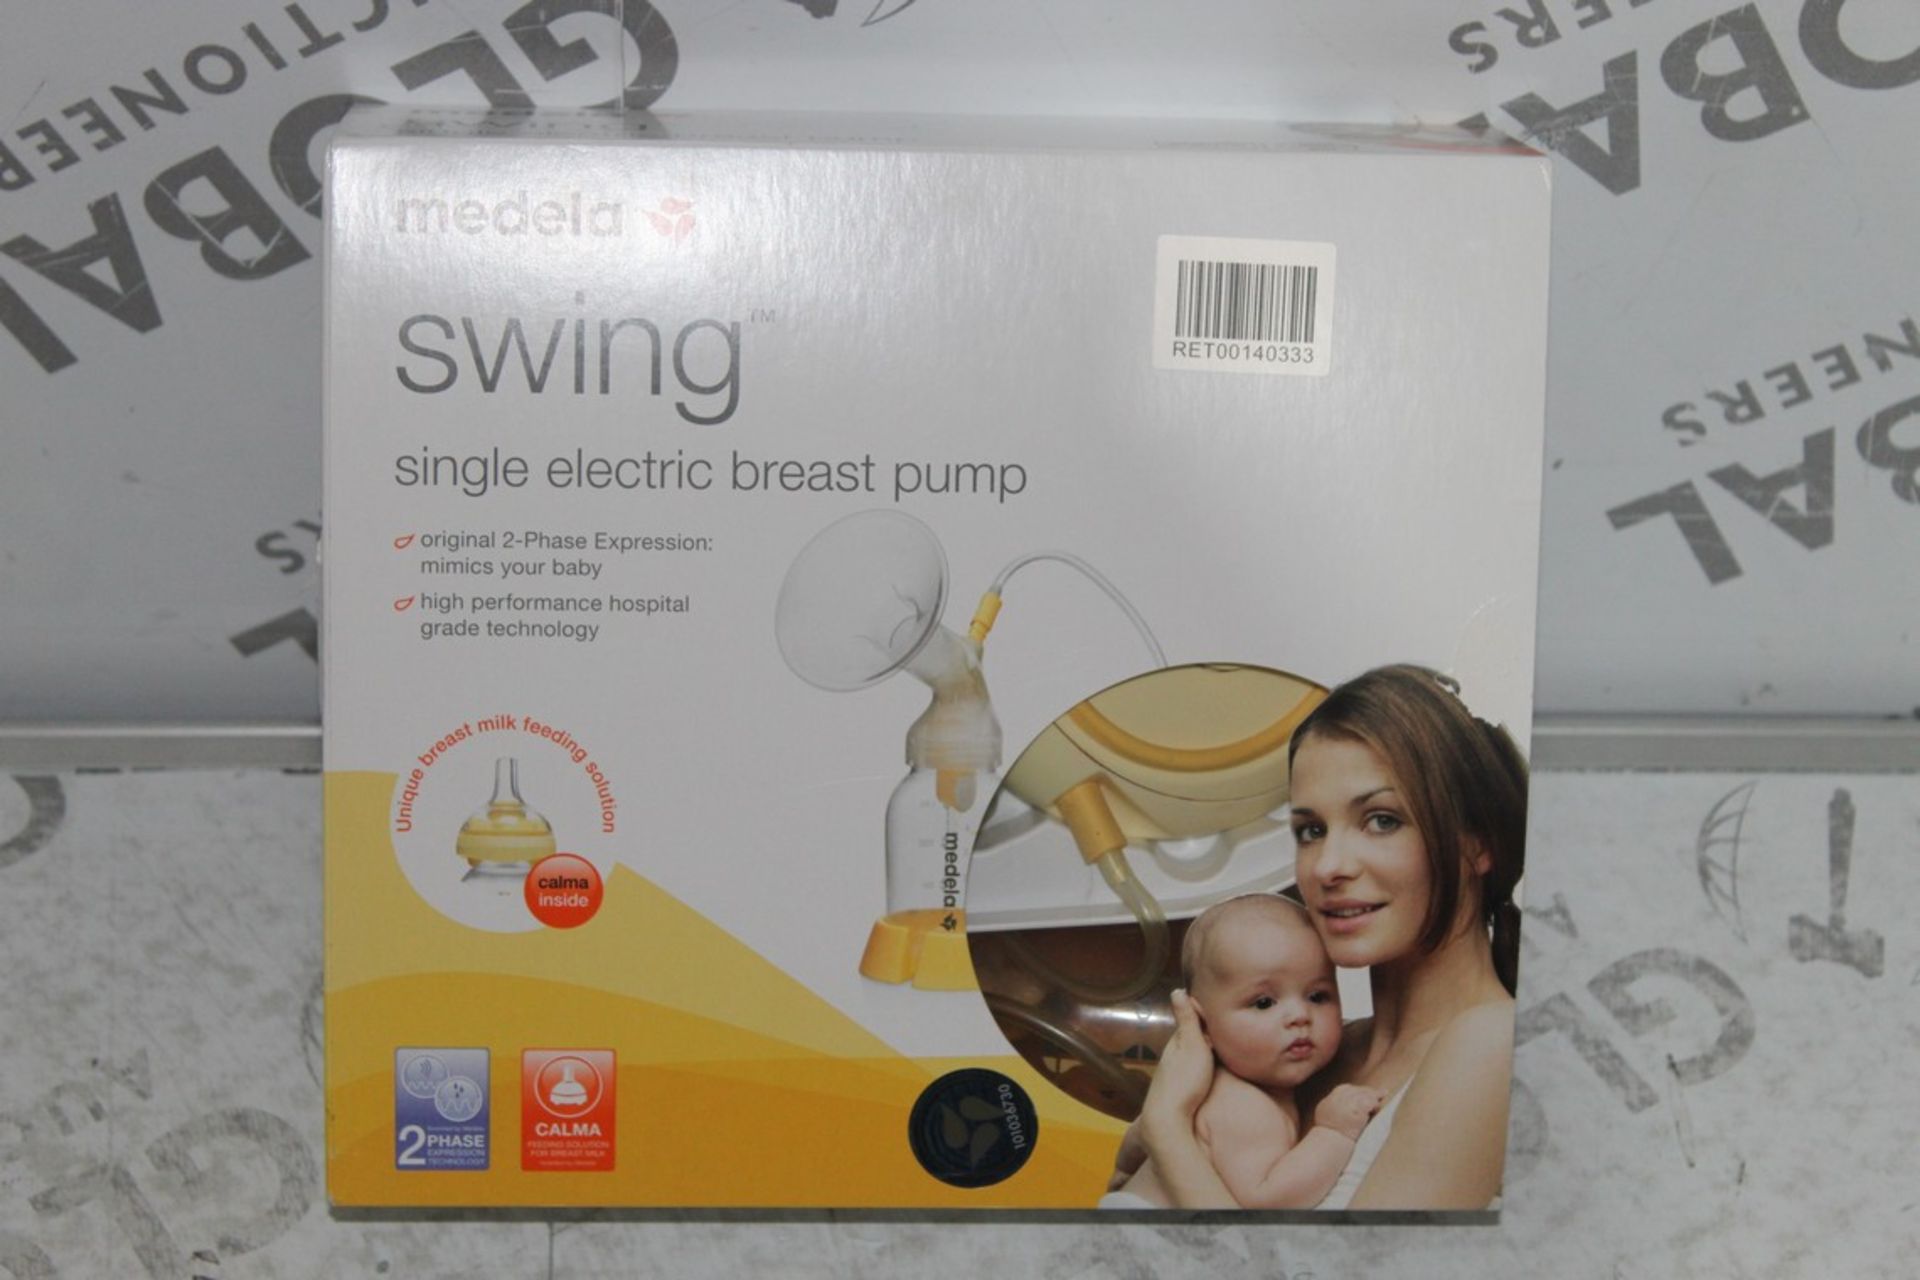 Boxed Medela Swing Single Electric Breast Pump RRP £75 (RET00140333) (Public Viewing and